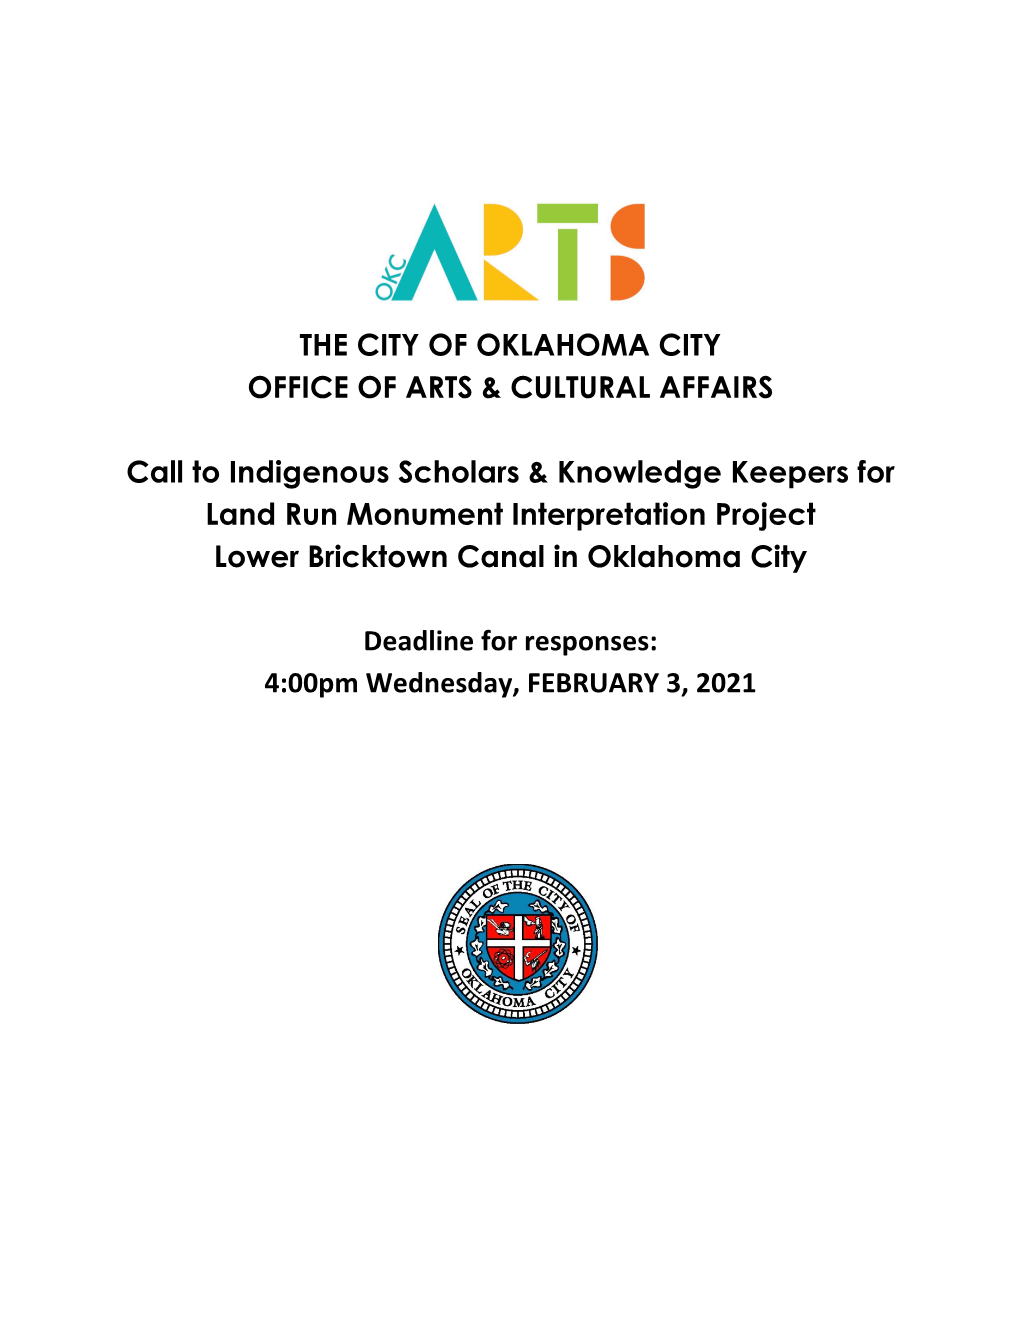 The City of Oklahoma City Office of Arts & Cultural